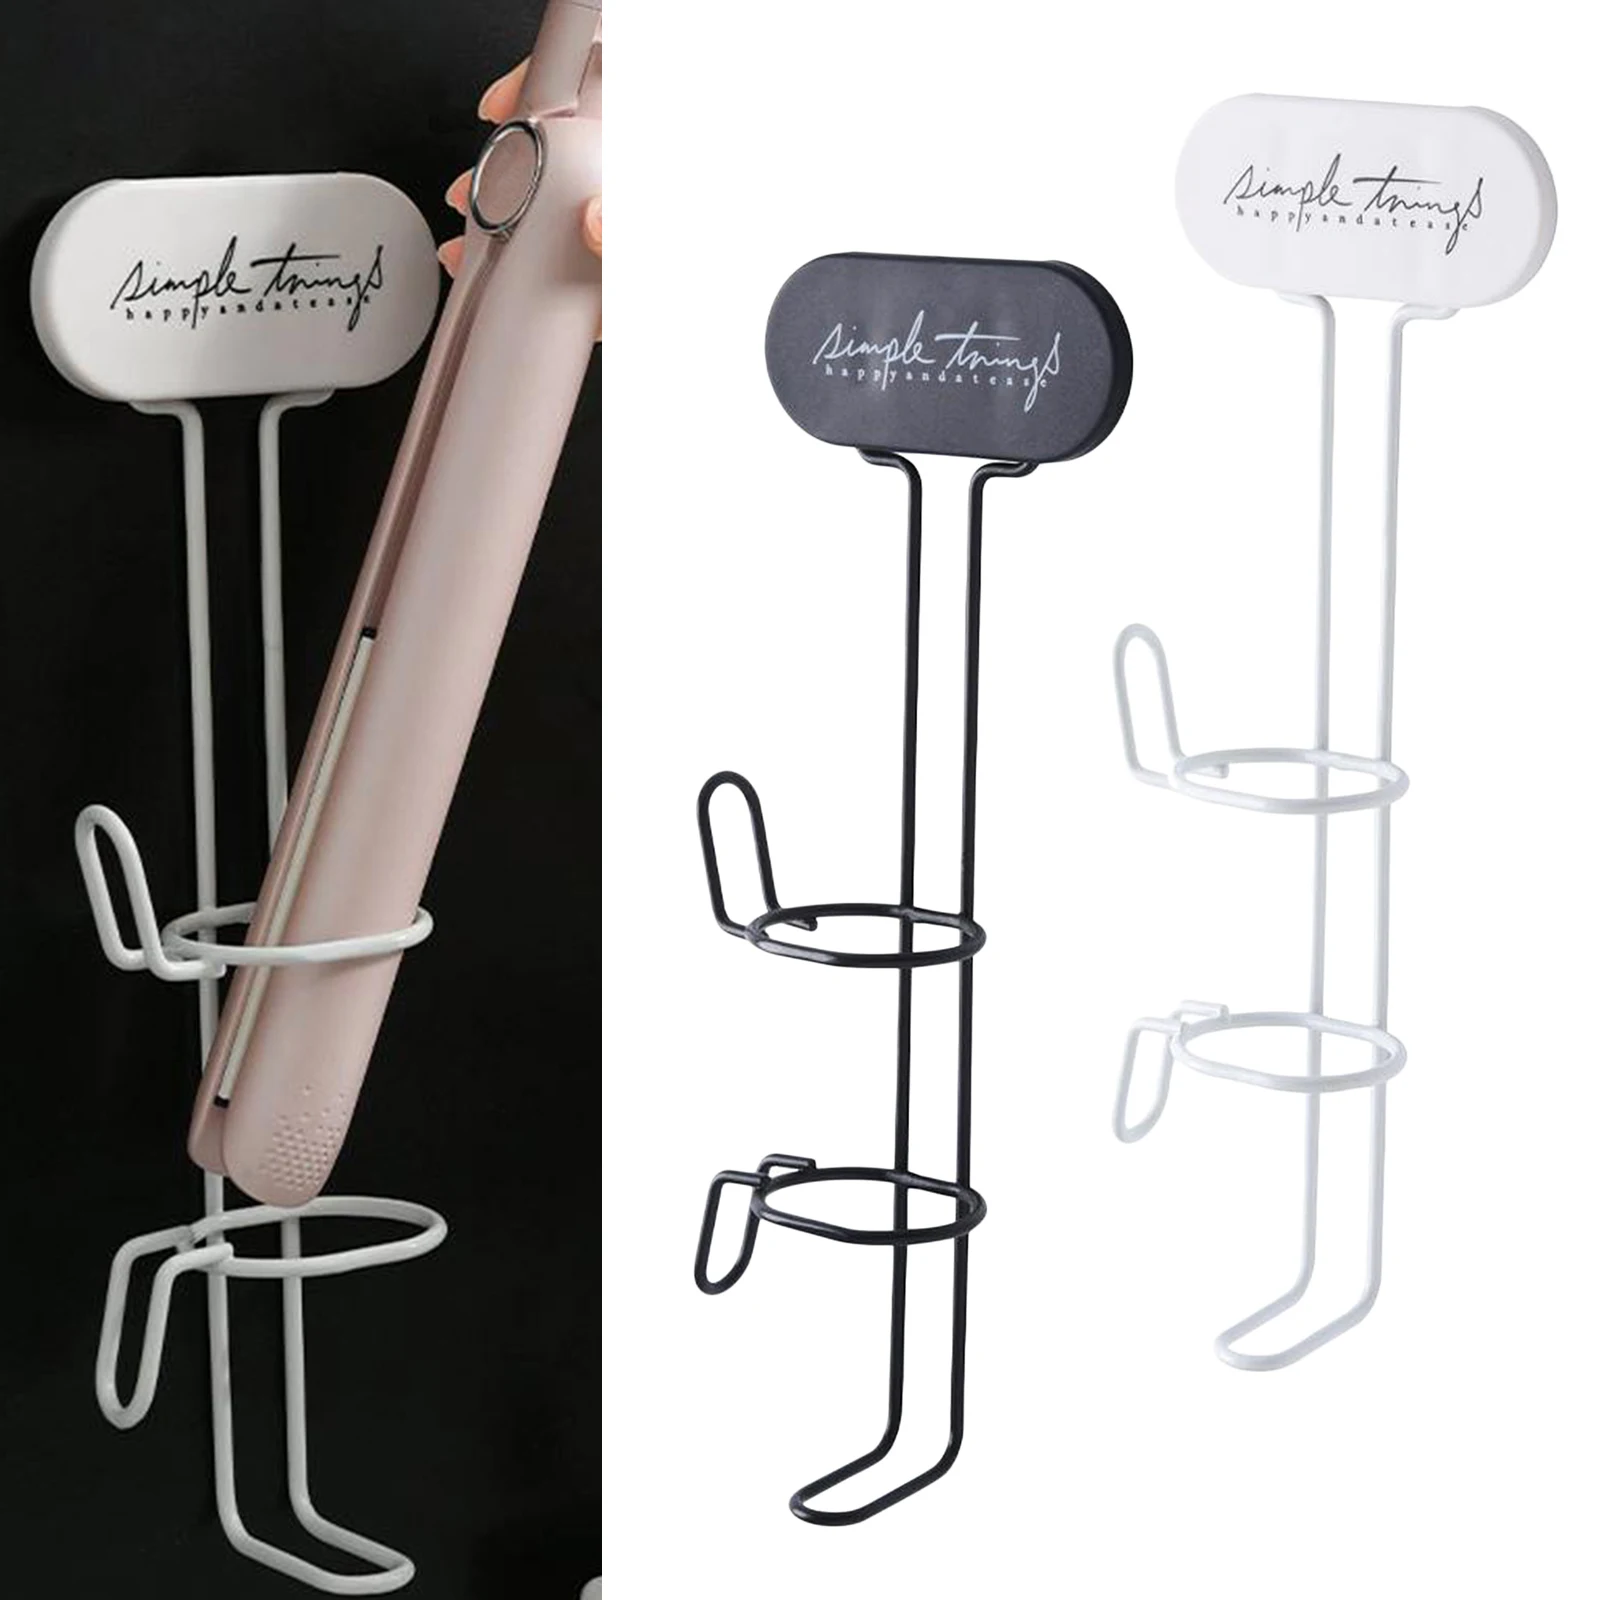 Hair Curling Iron Holder, Straighteners Curling Wands Rack Wall Mounted, Space